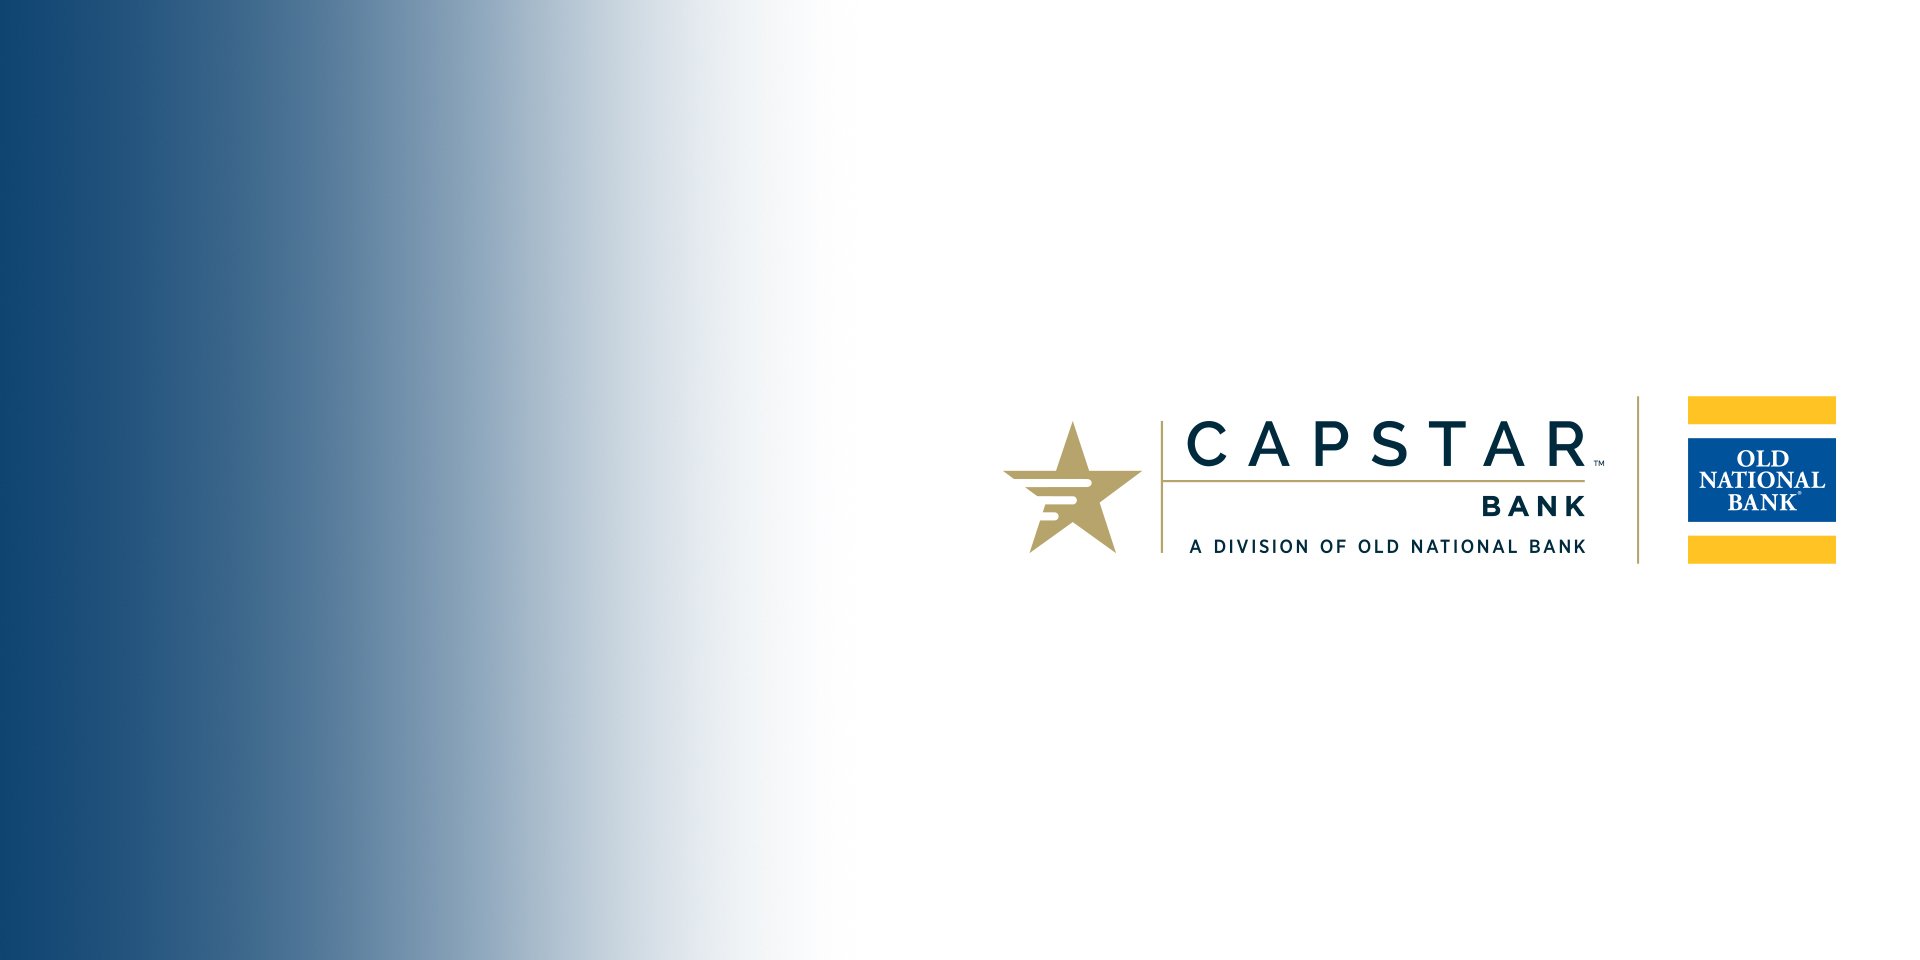 CapStar a division of Old National Bank